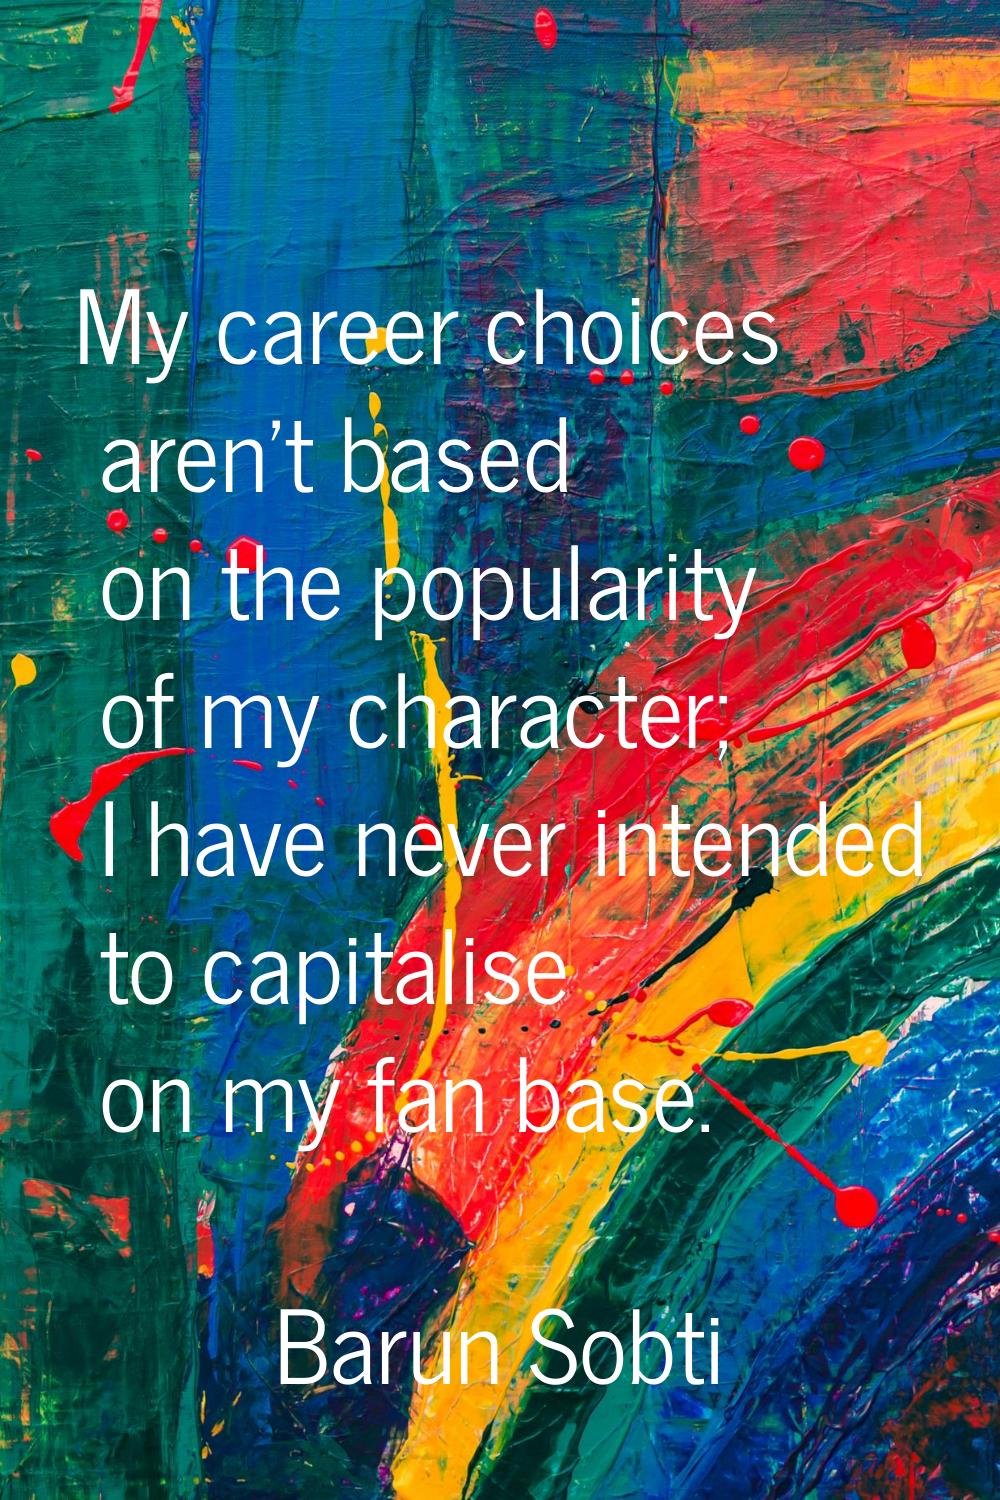 My career choices aren't based on the popularity of my character; I have never intended to capitali